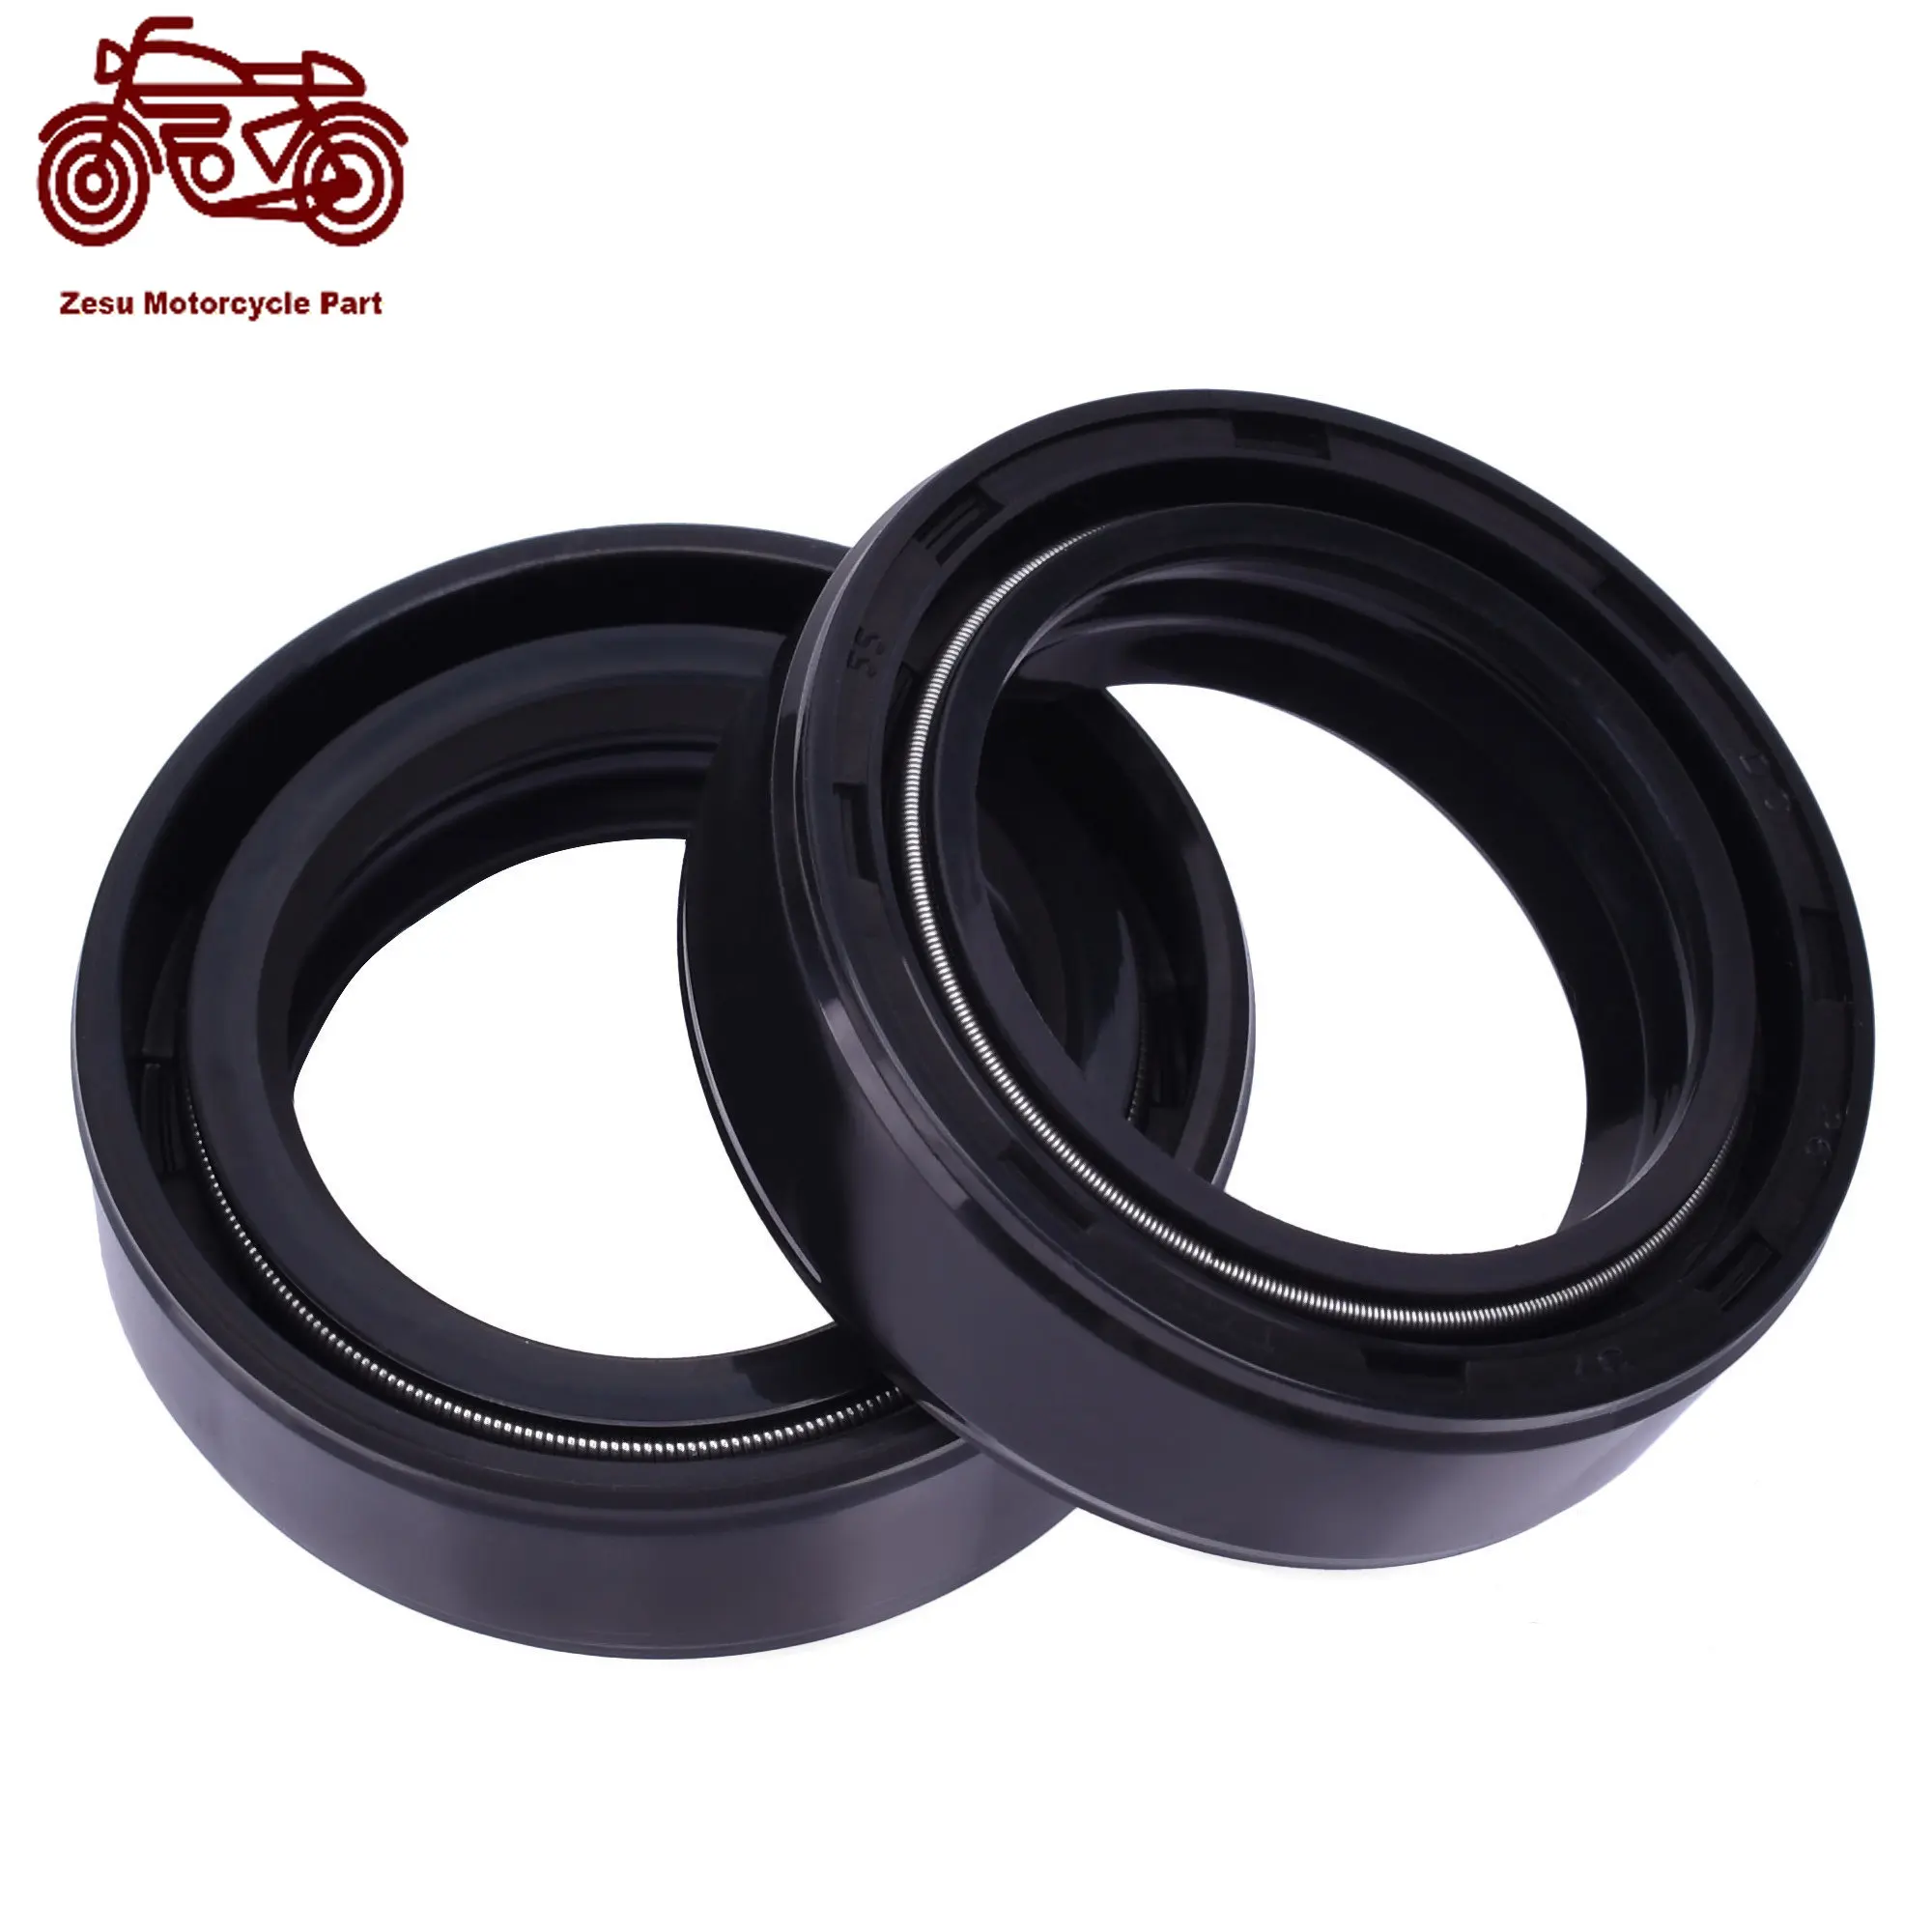 

26x37x10.5 26 37 Motor Bike Front Shock Absorber Fork Oil Seal DY100 DY 100 For Suzuki DS80 JR80 RM50 RM60 DS 80 JR 80 RM 50 60